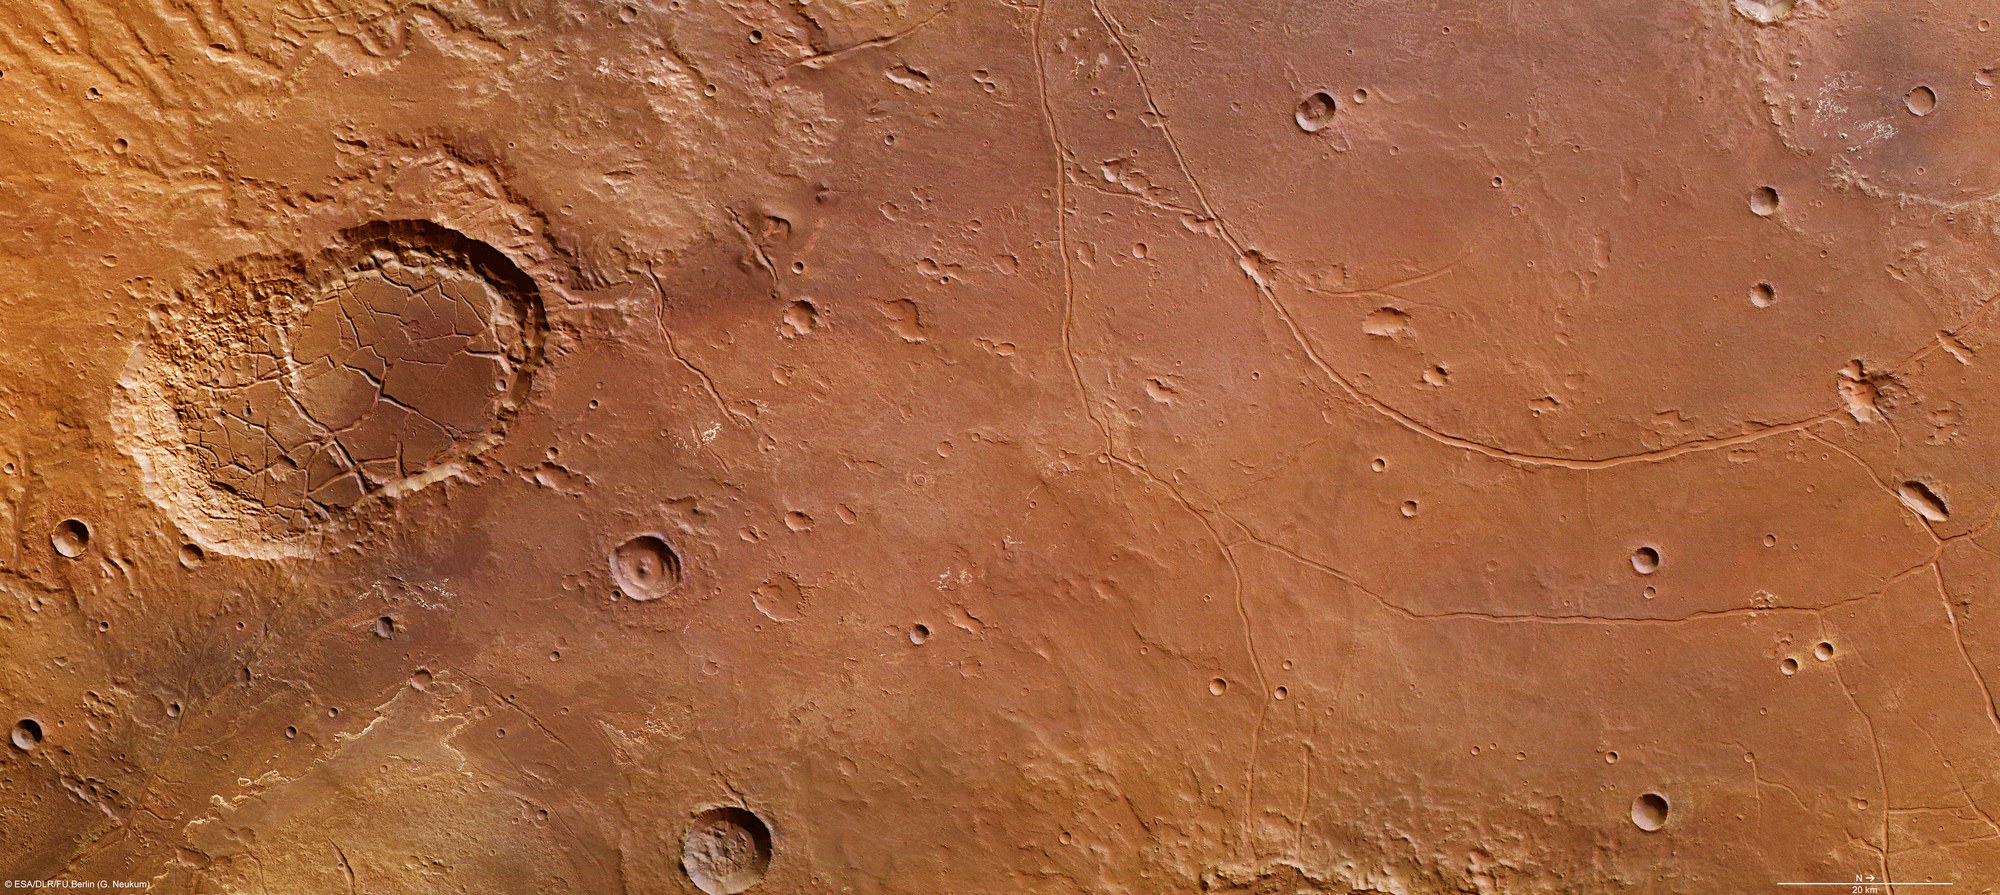 Colour plan view of the northern part of the mouth of Ladon Valles